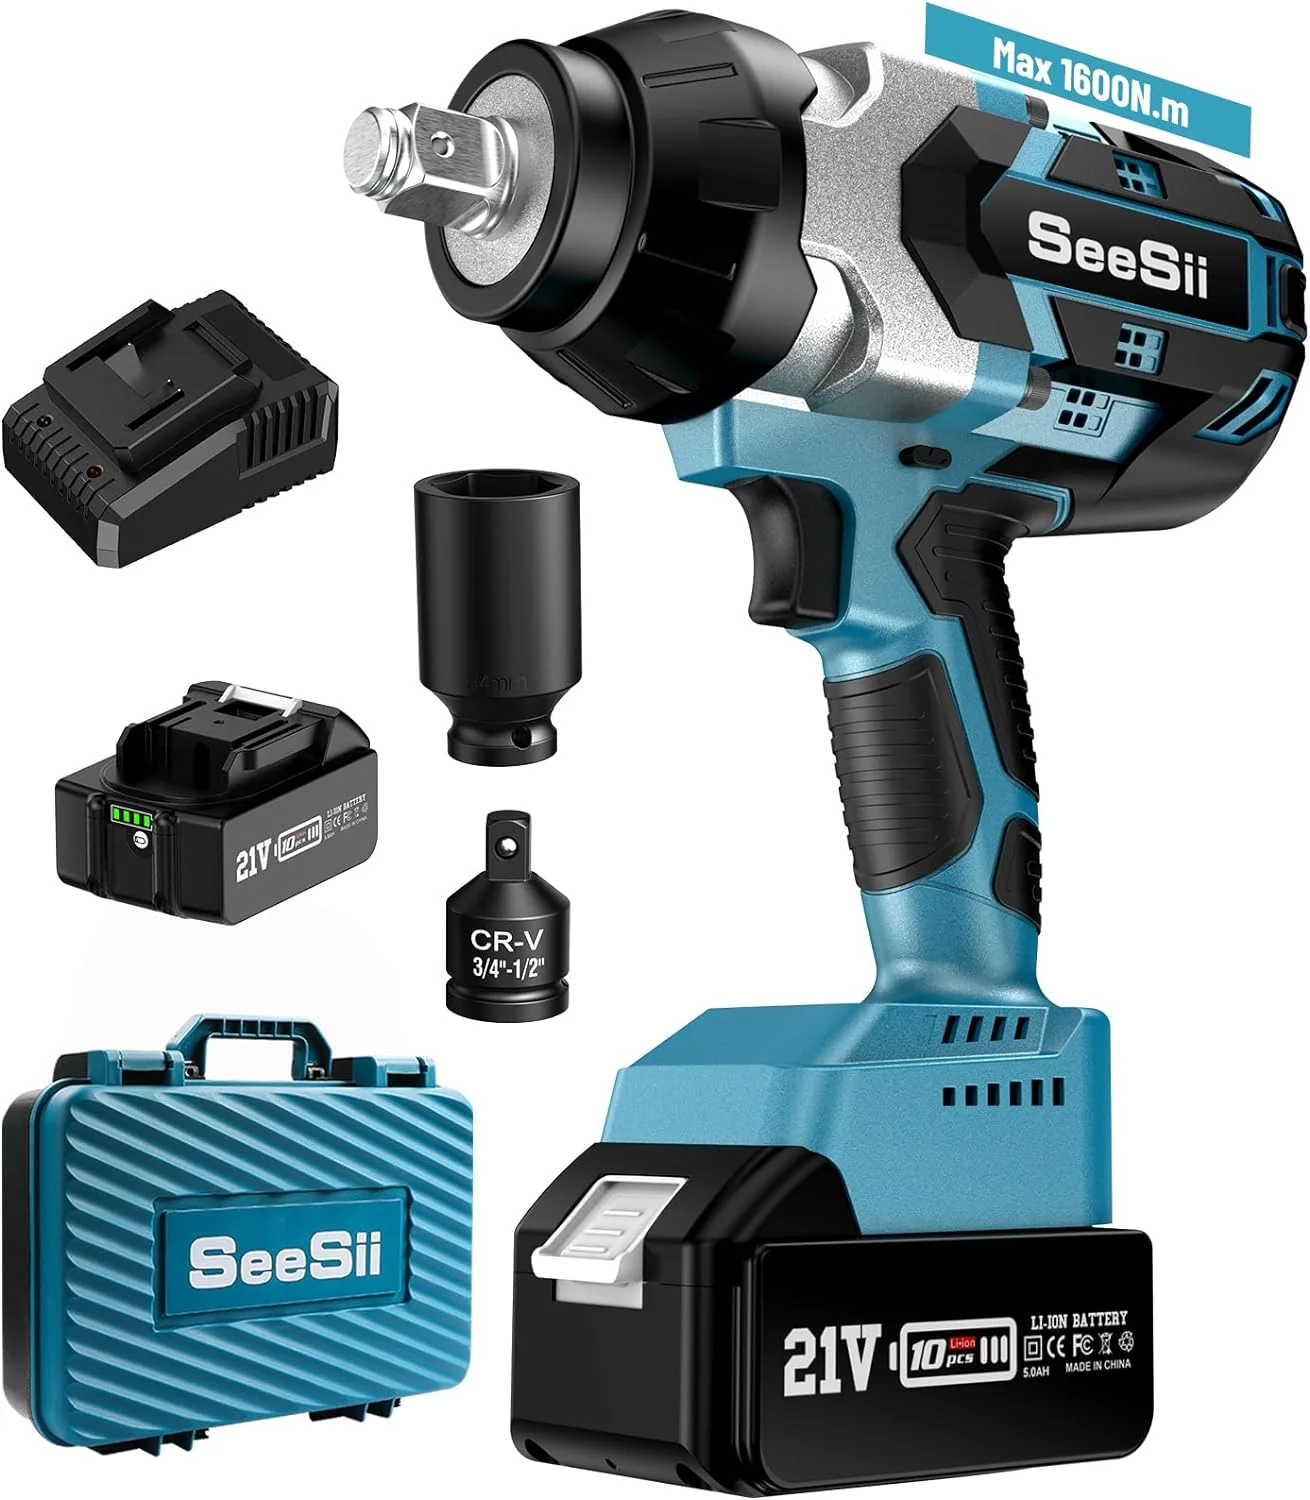 

Seesii Cordless Impact Wrench, 1180Ft-lbs(1600N.m) High Torque Impact Gun 3/4" Brushless Impact Wrench w/ 5.0Ah Battery